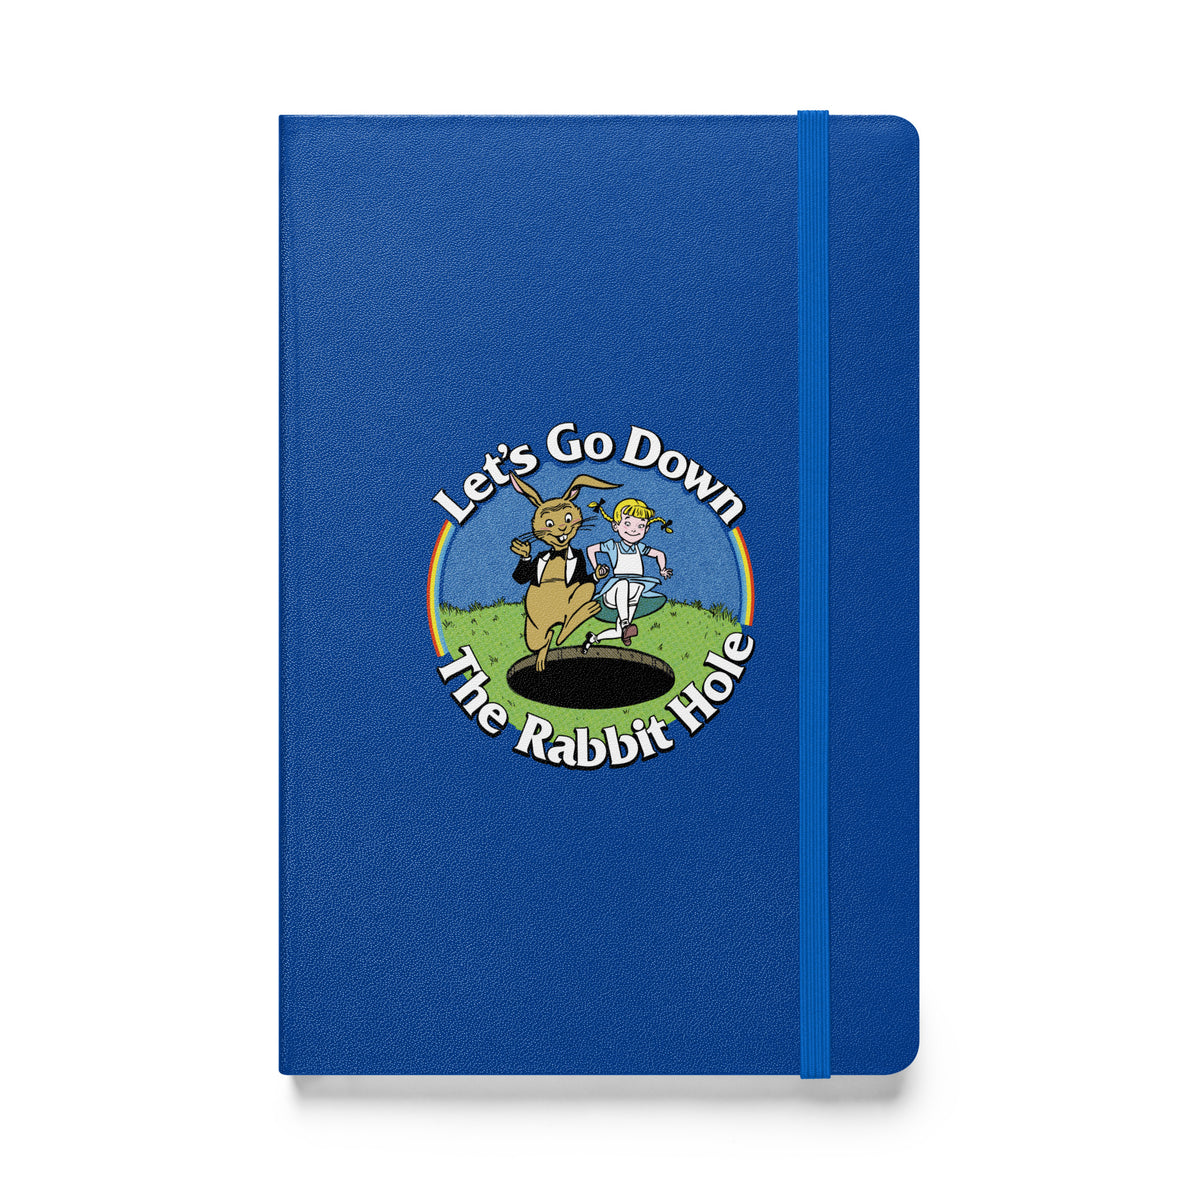 Let&#39;s Go Down the Rabbit Hole Hardcover Bound Notebook